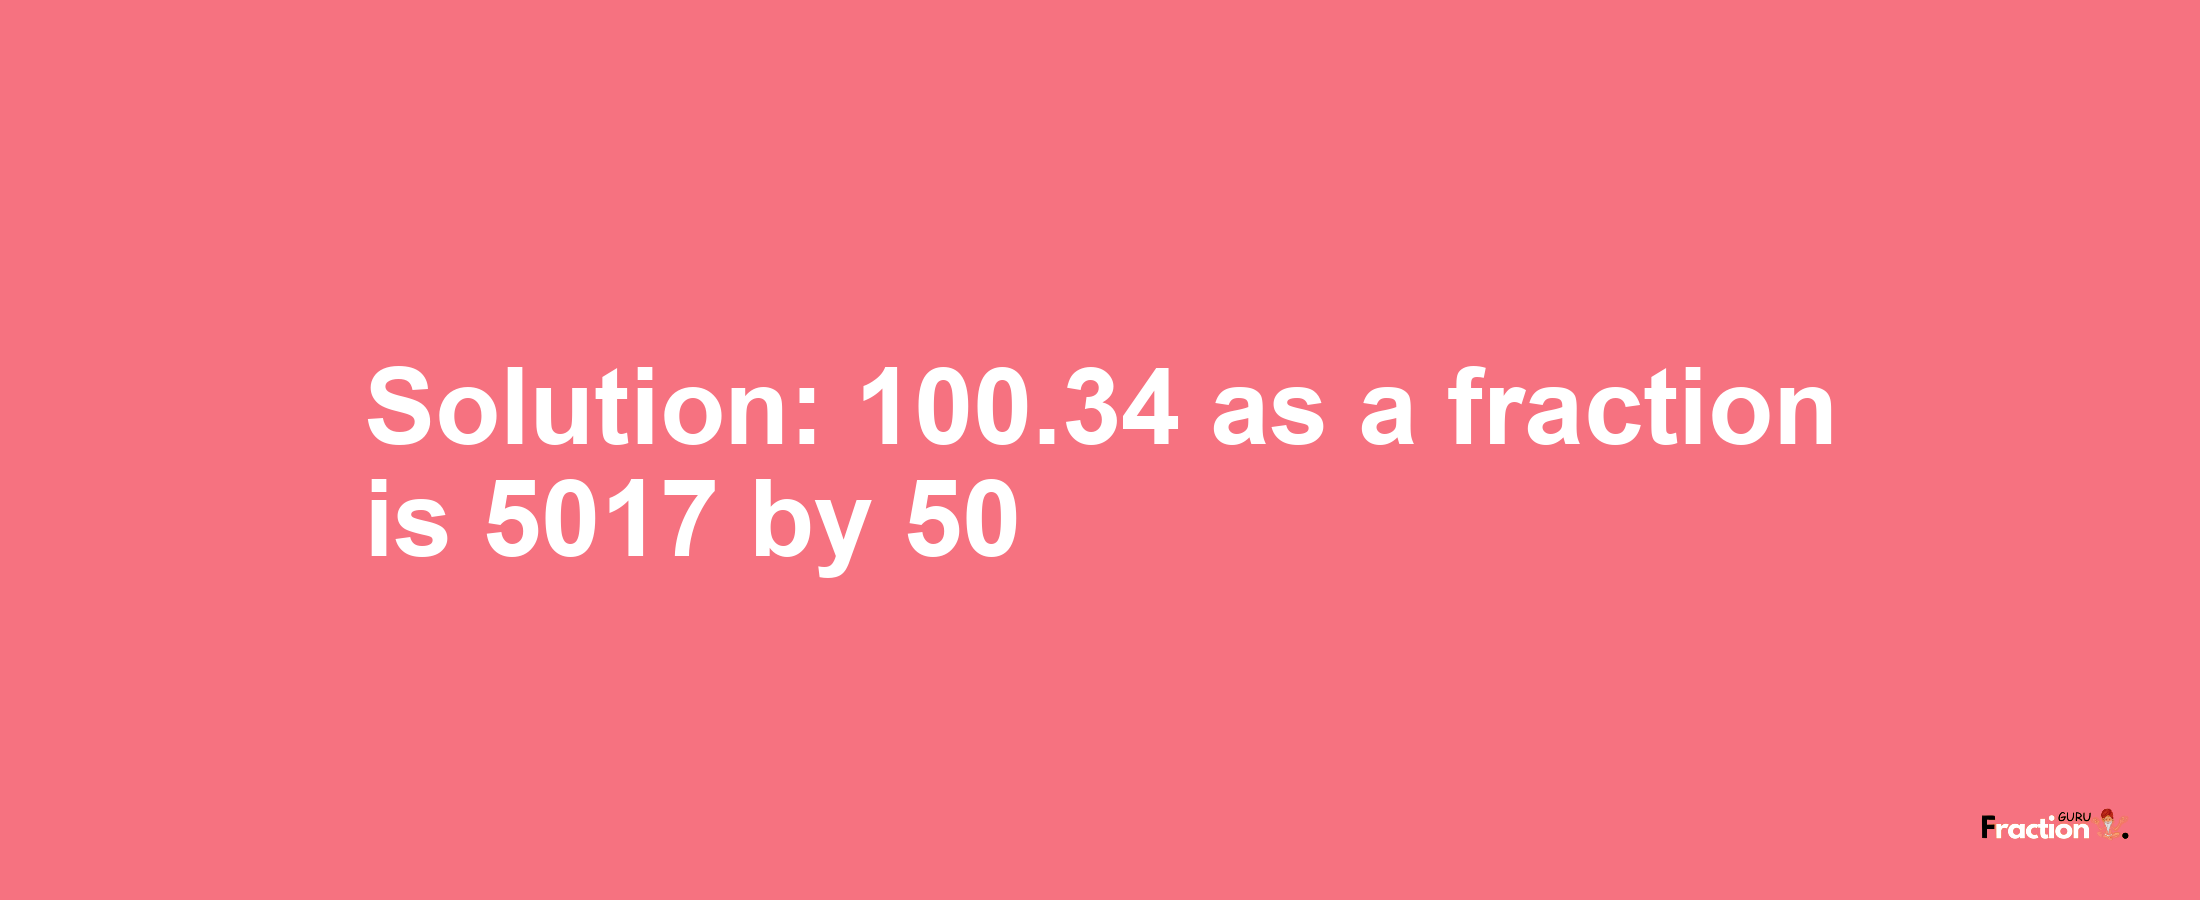 Solution:100.34 as a fraction is 5017/50